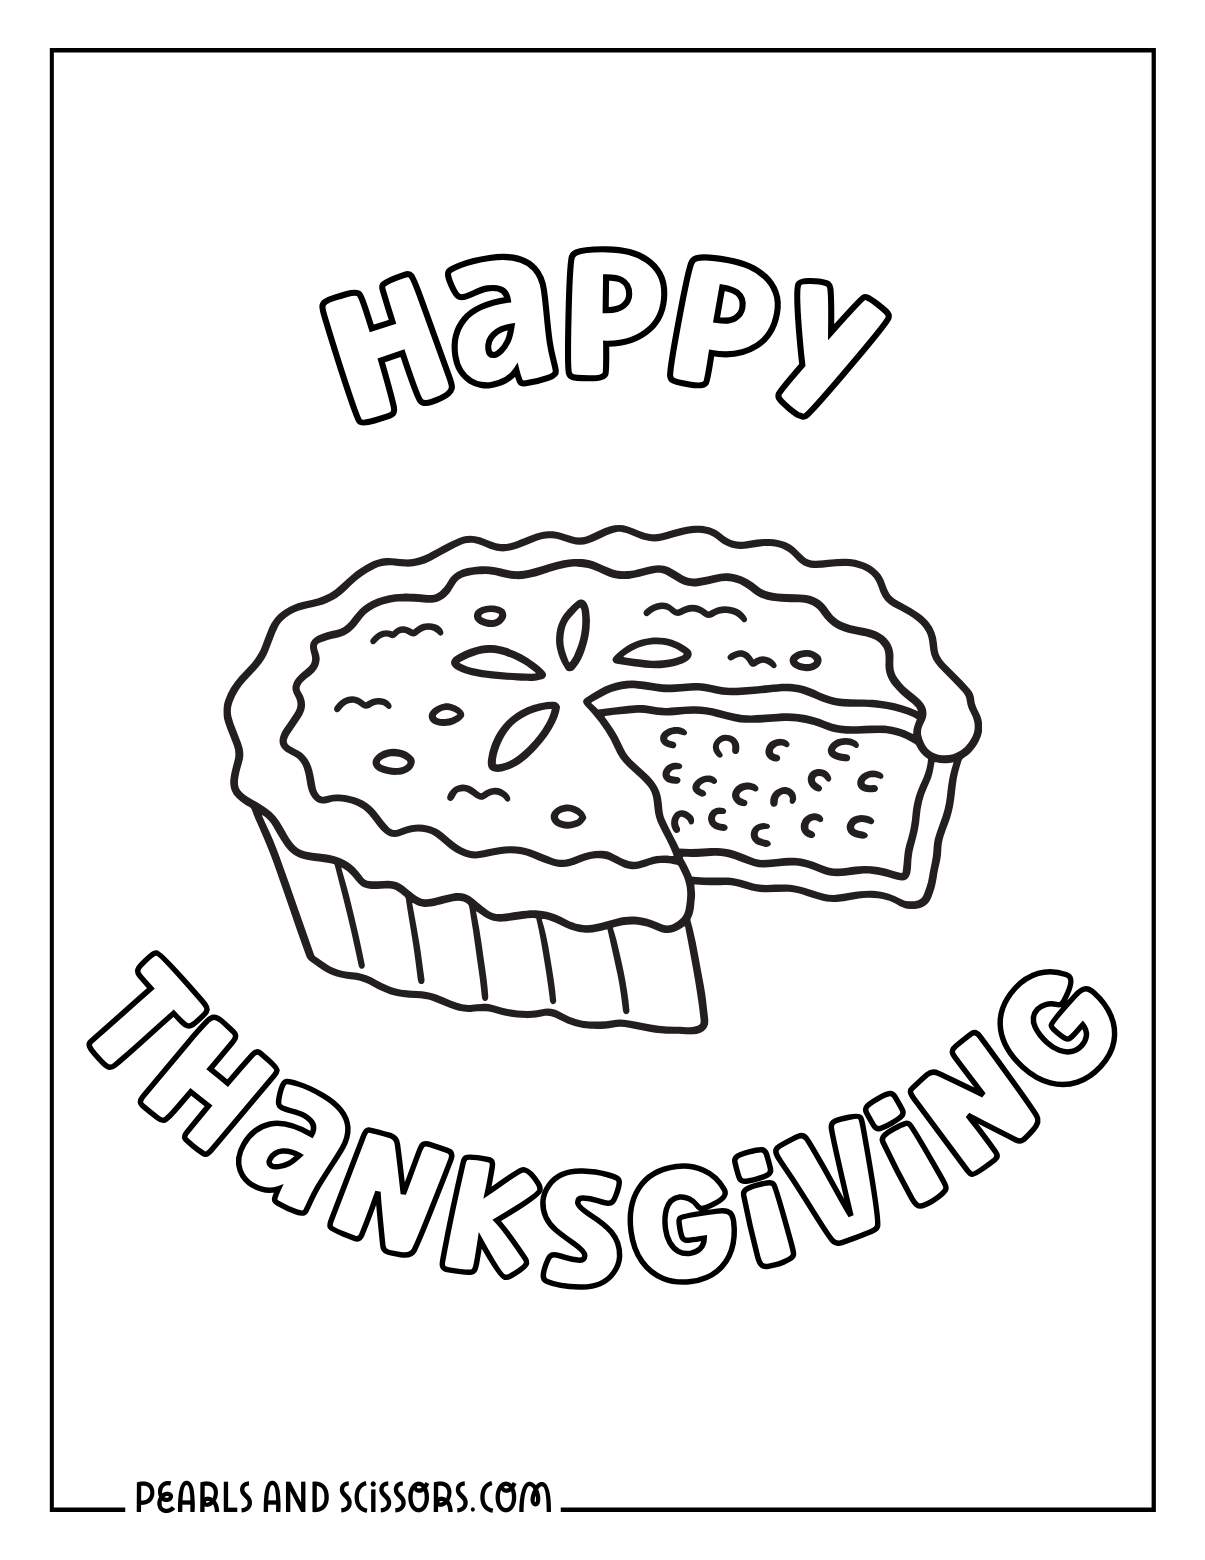 Cute pumpkin pie thanksgiving coloring page for kids.